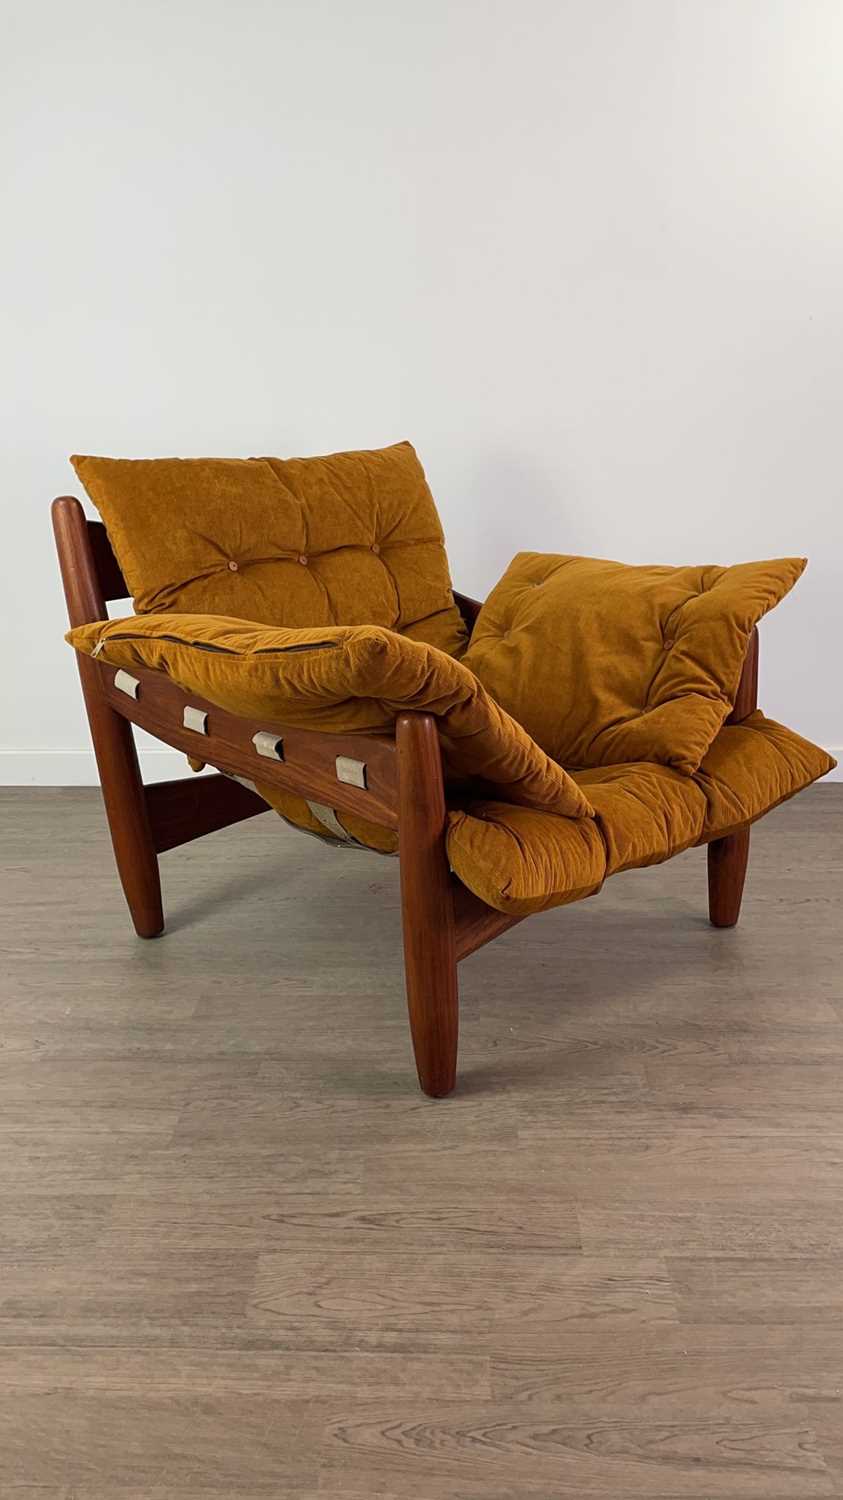 Lot 301 - A SHERIFF CHAIR AND OTTOMAN AFTER SERGIO RODRIGUES